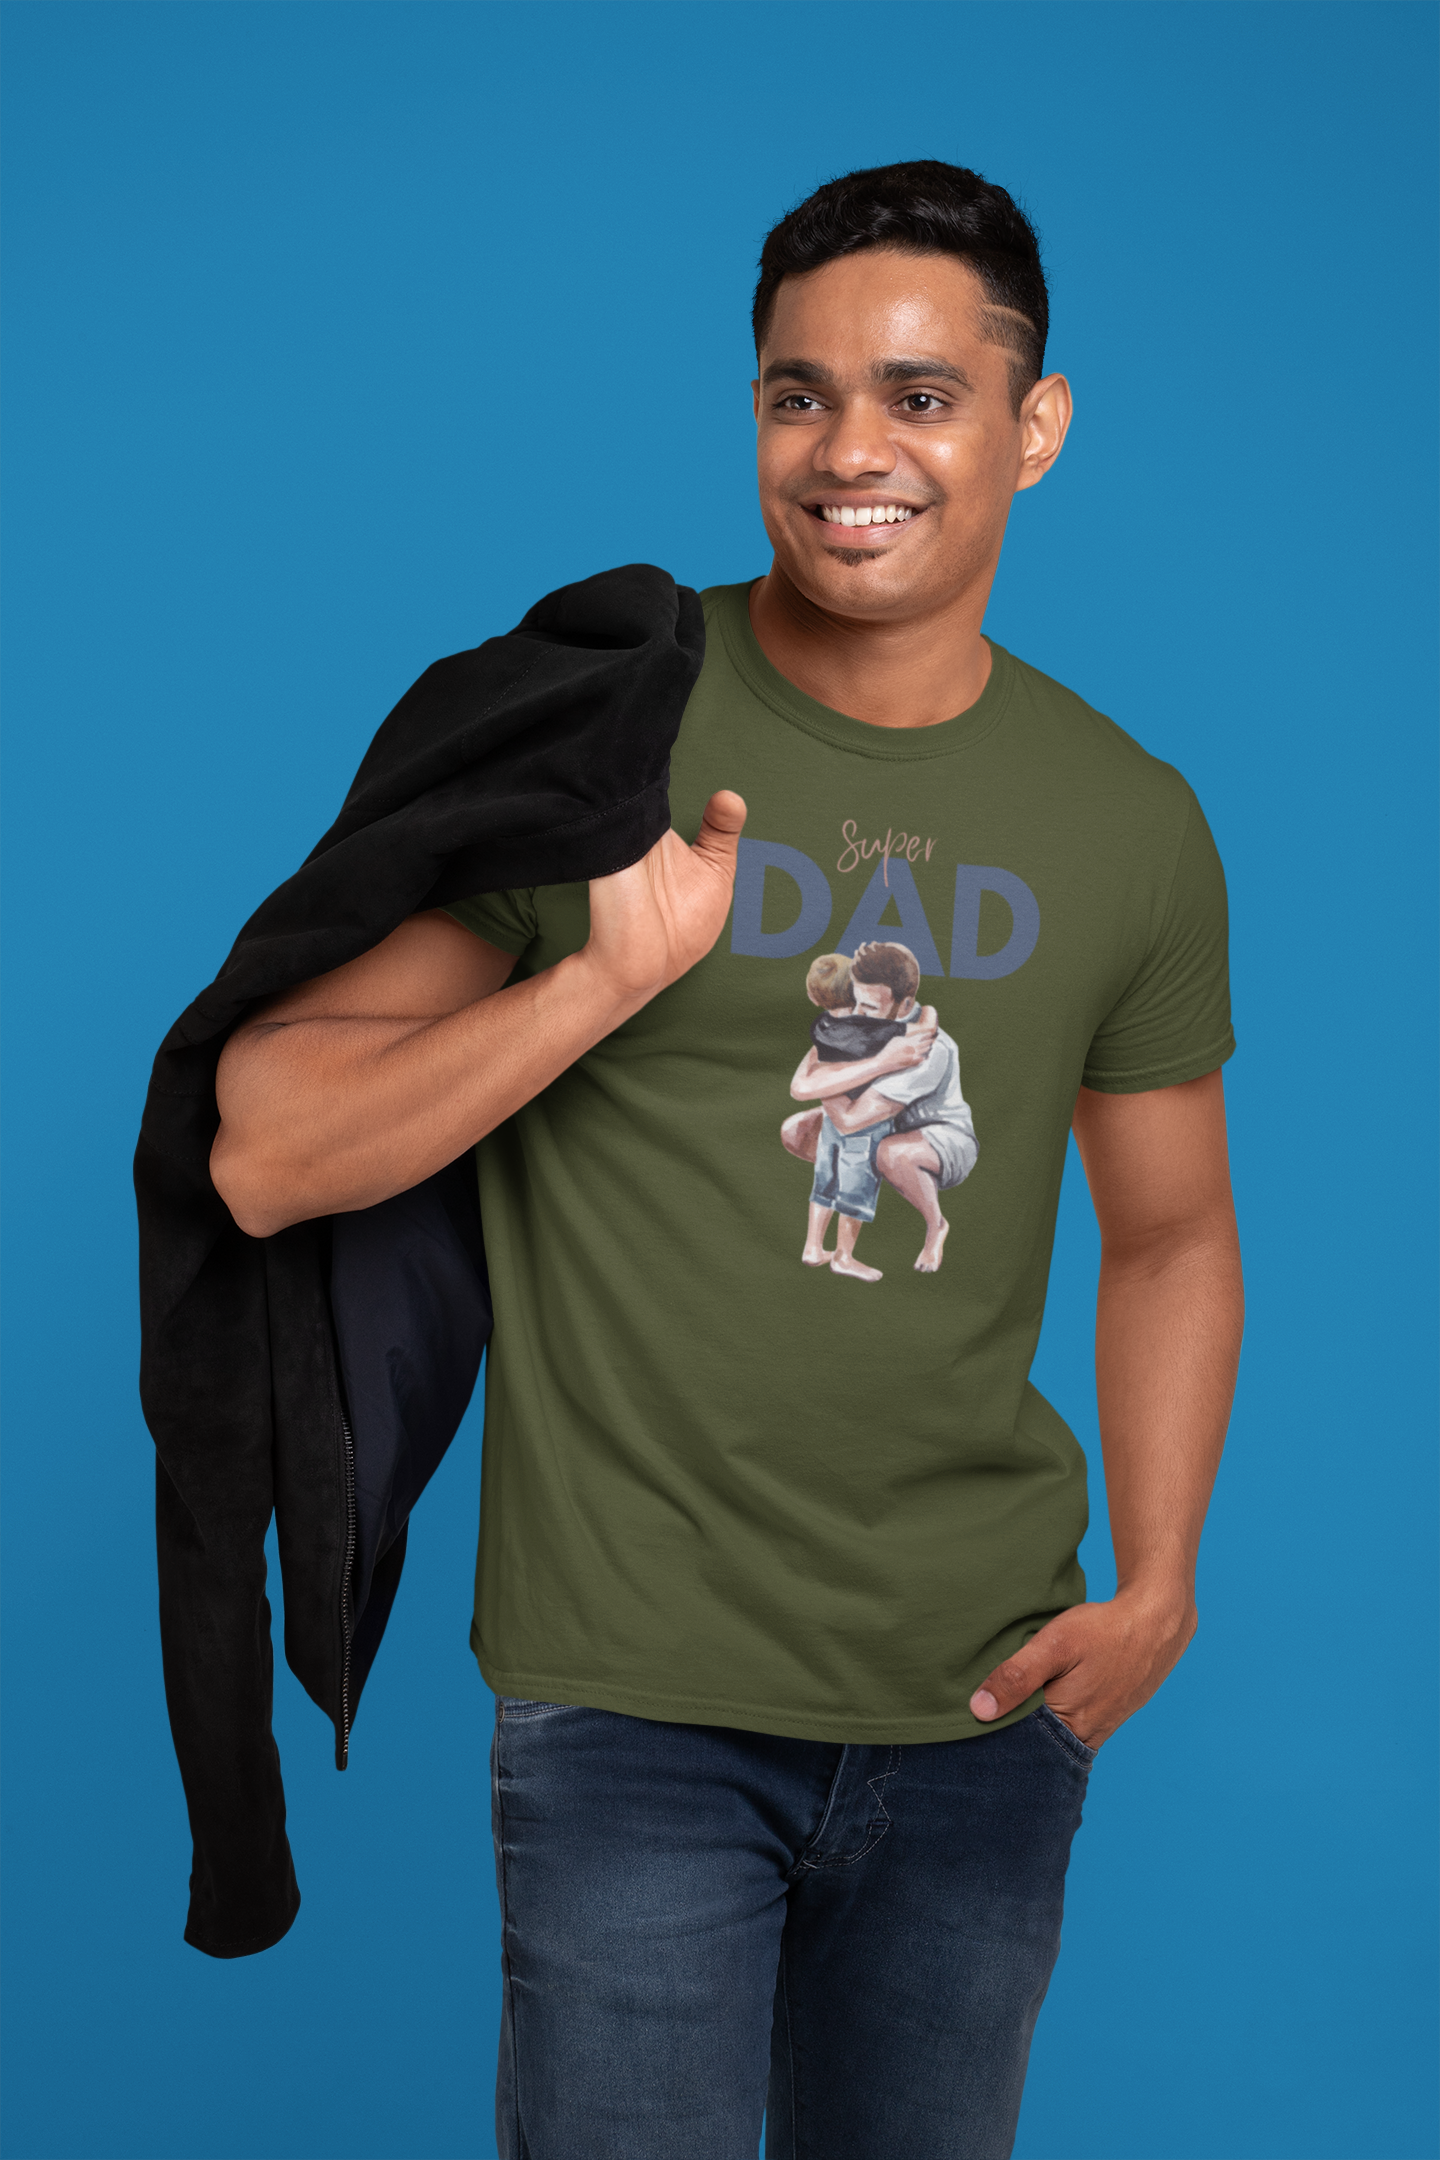 Super Dad Vibes: Premium Cotton Tee for the Ultimate Father